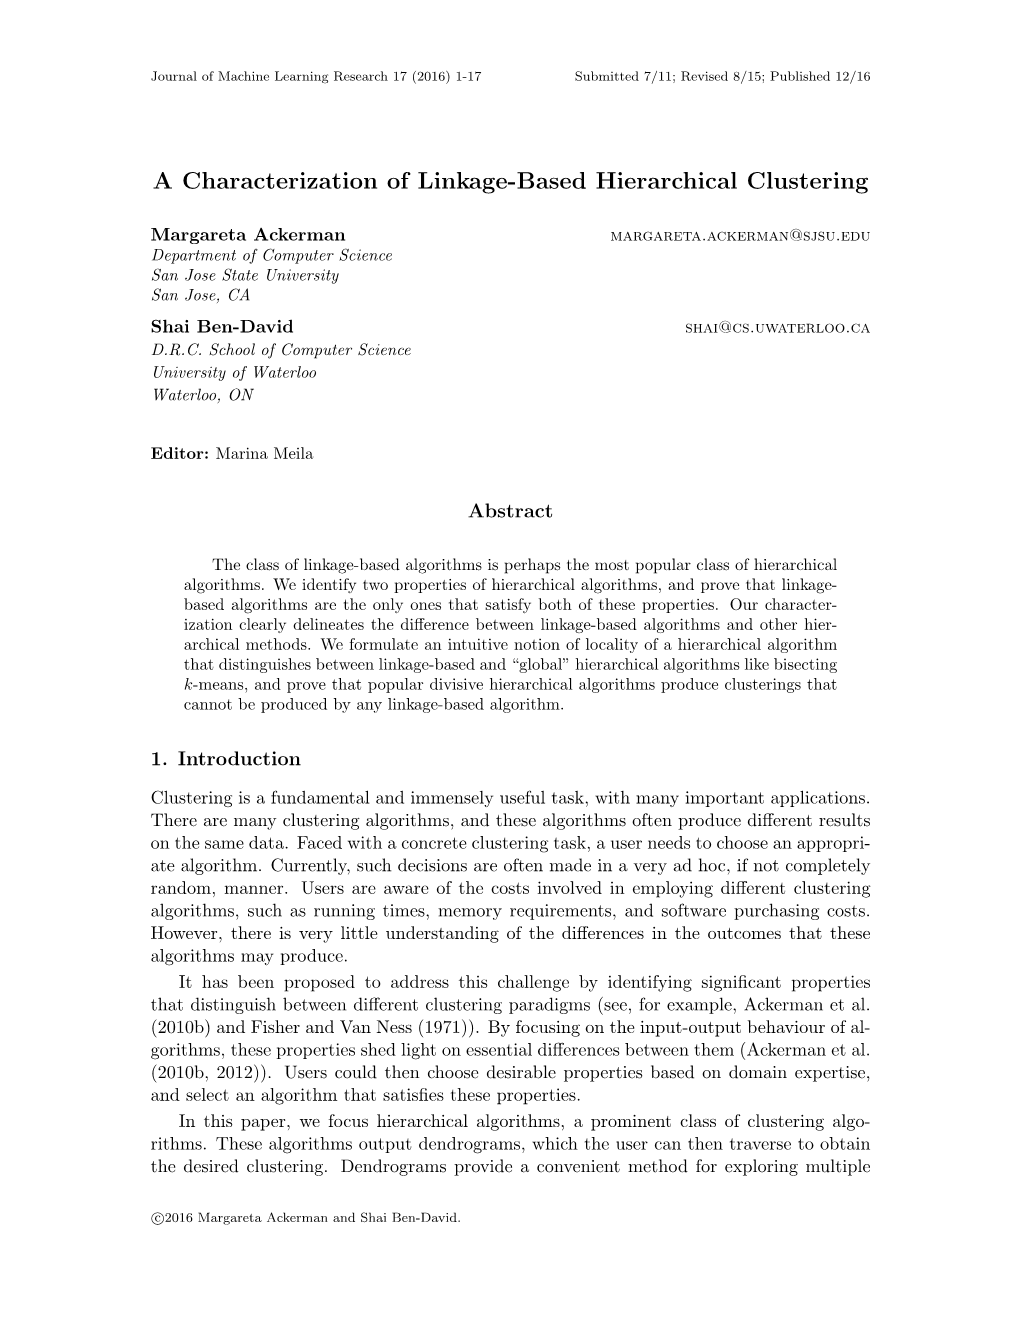 A Characterization of Linkage-Based Hierarchical Clustering